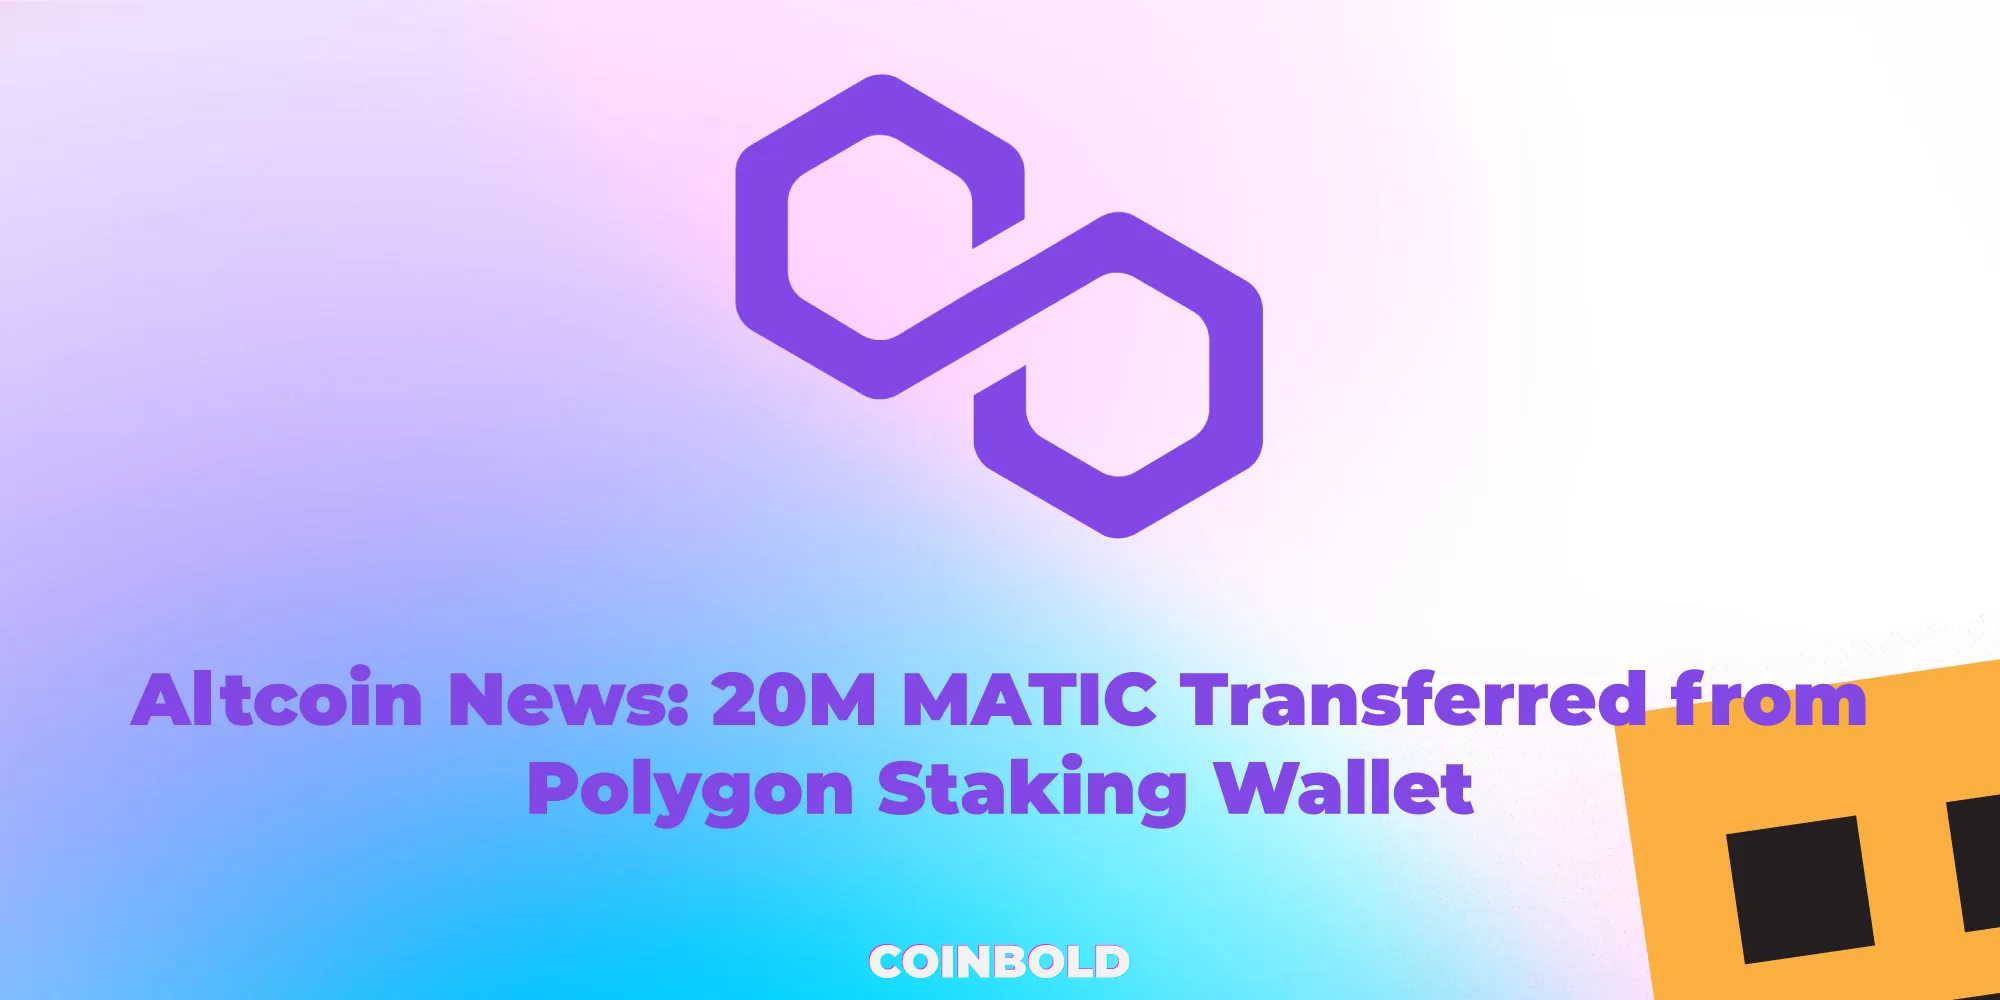 Altcoin News: 20M MATIC Transferred from Polygon Staking Wallet